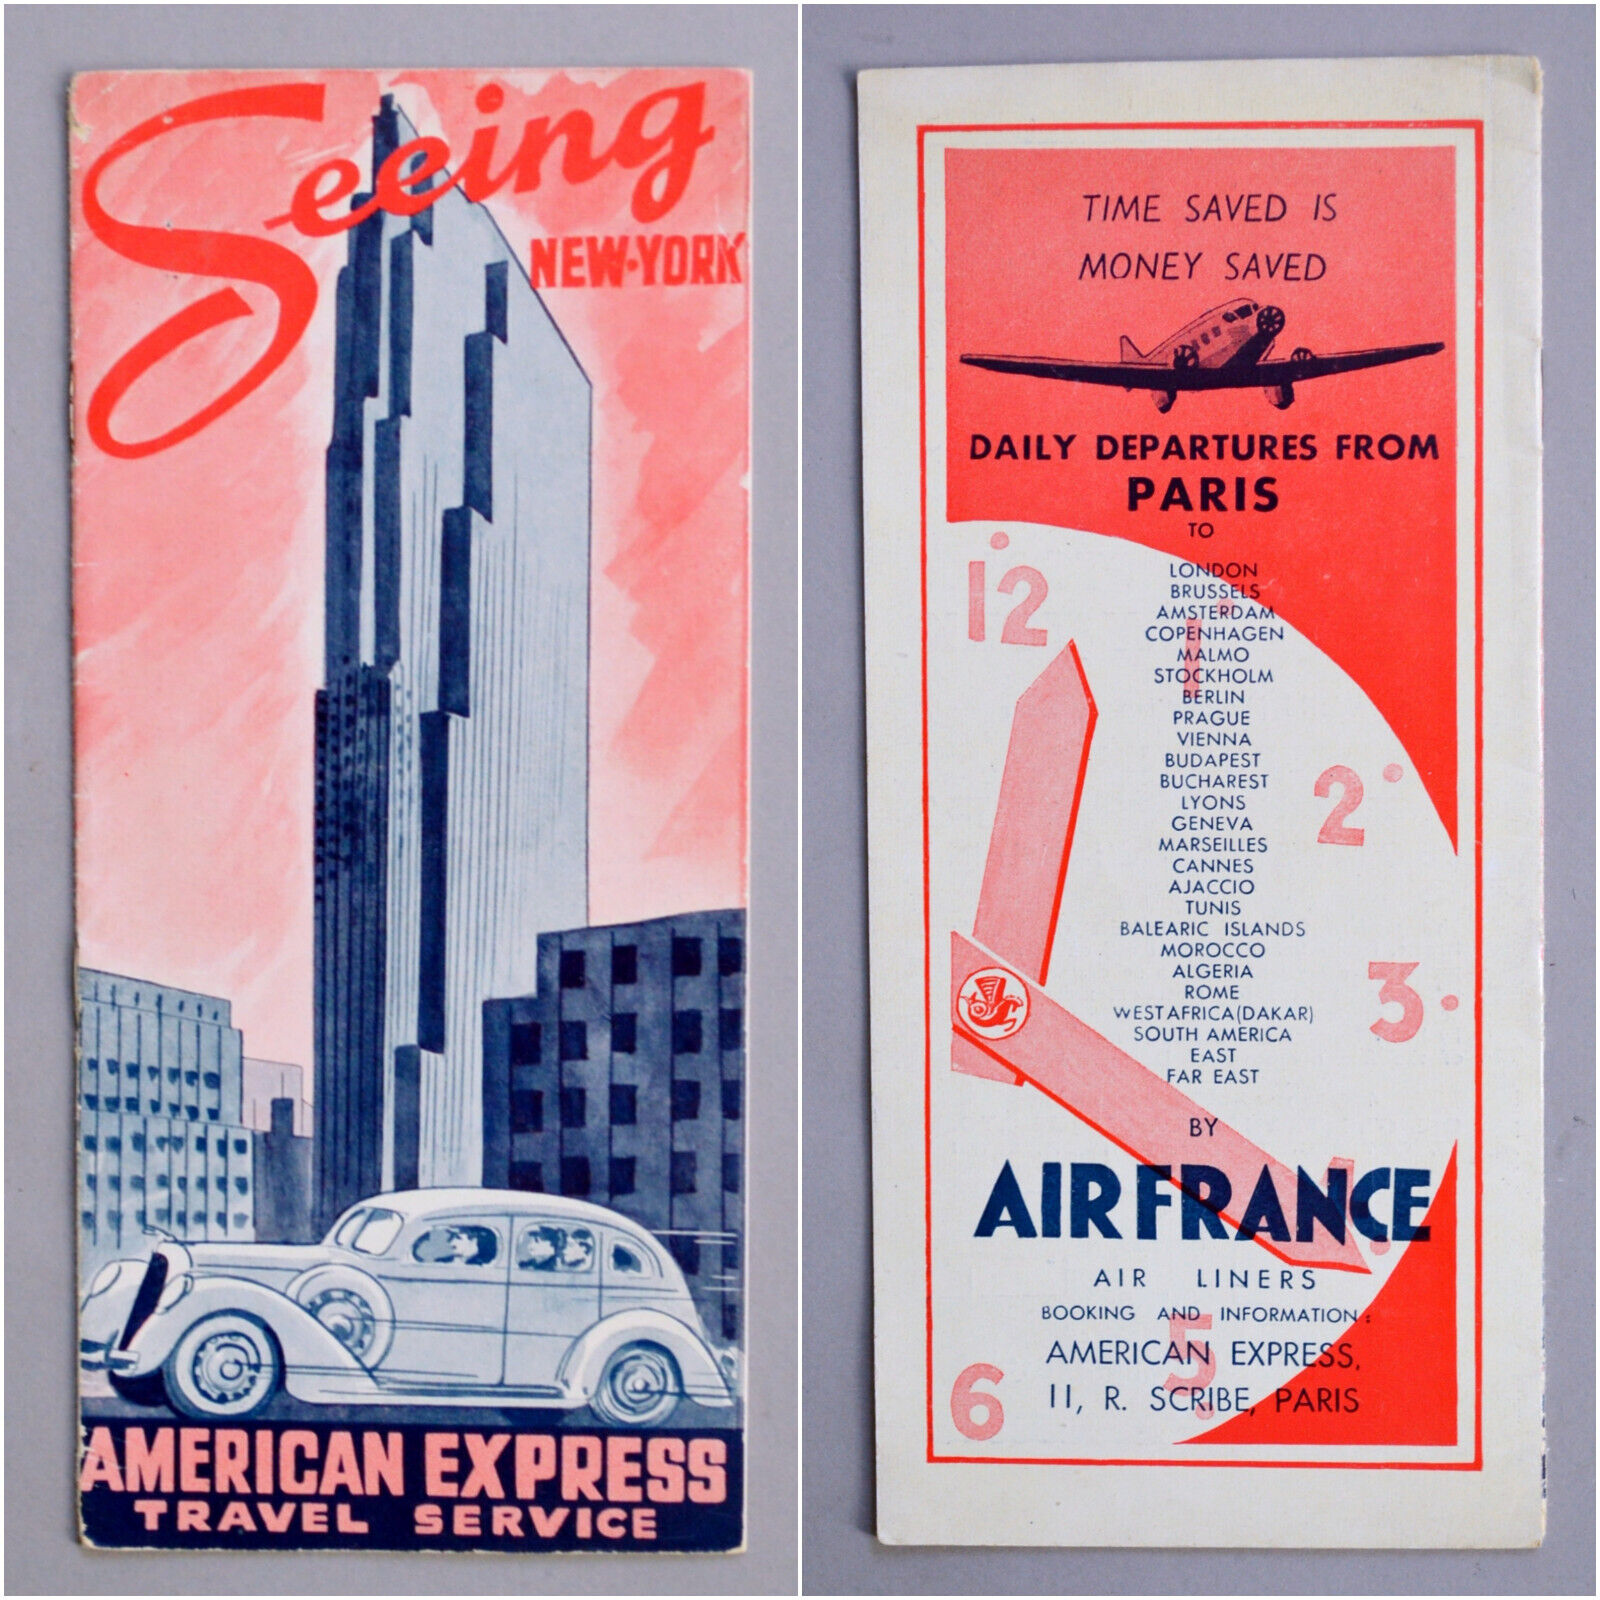 vintage SEEING NEW YORK tourist booklet American Express travel mid-century 40s